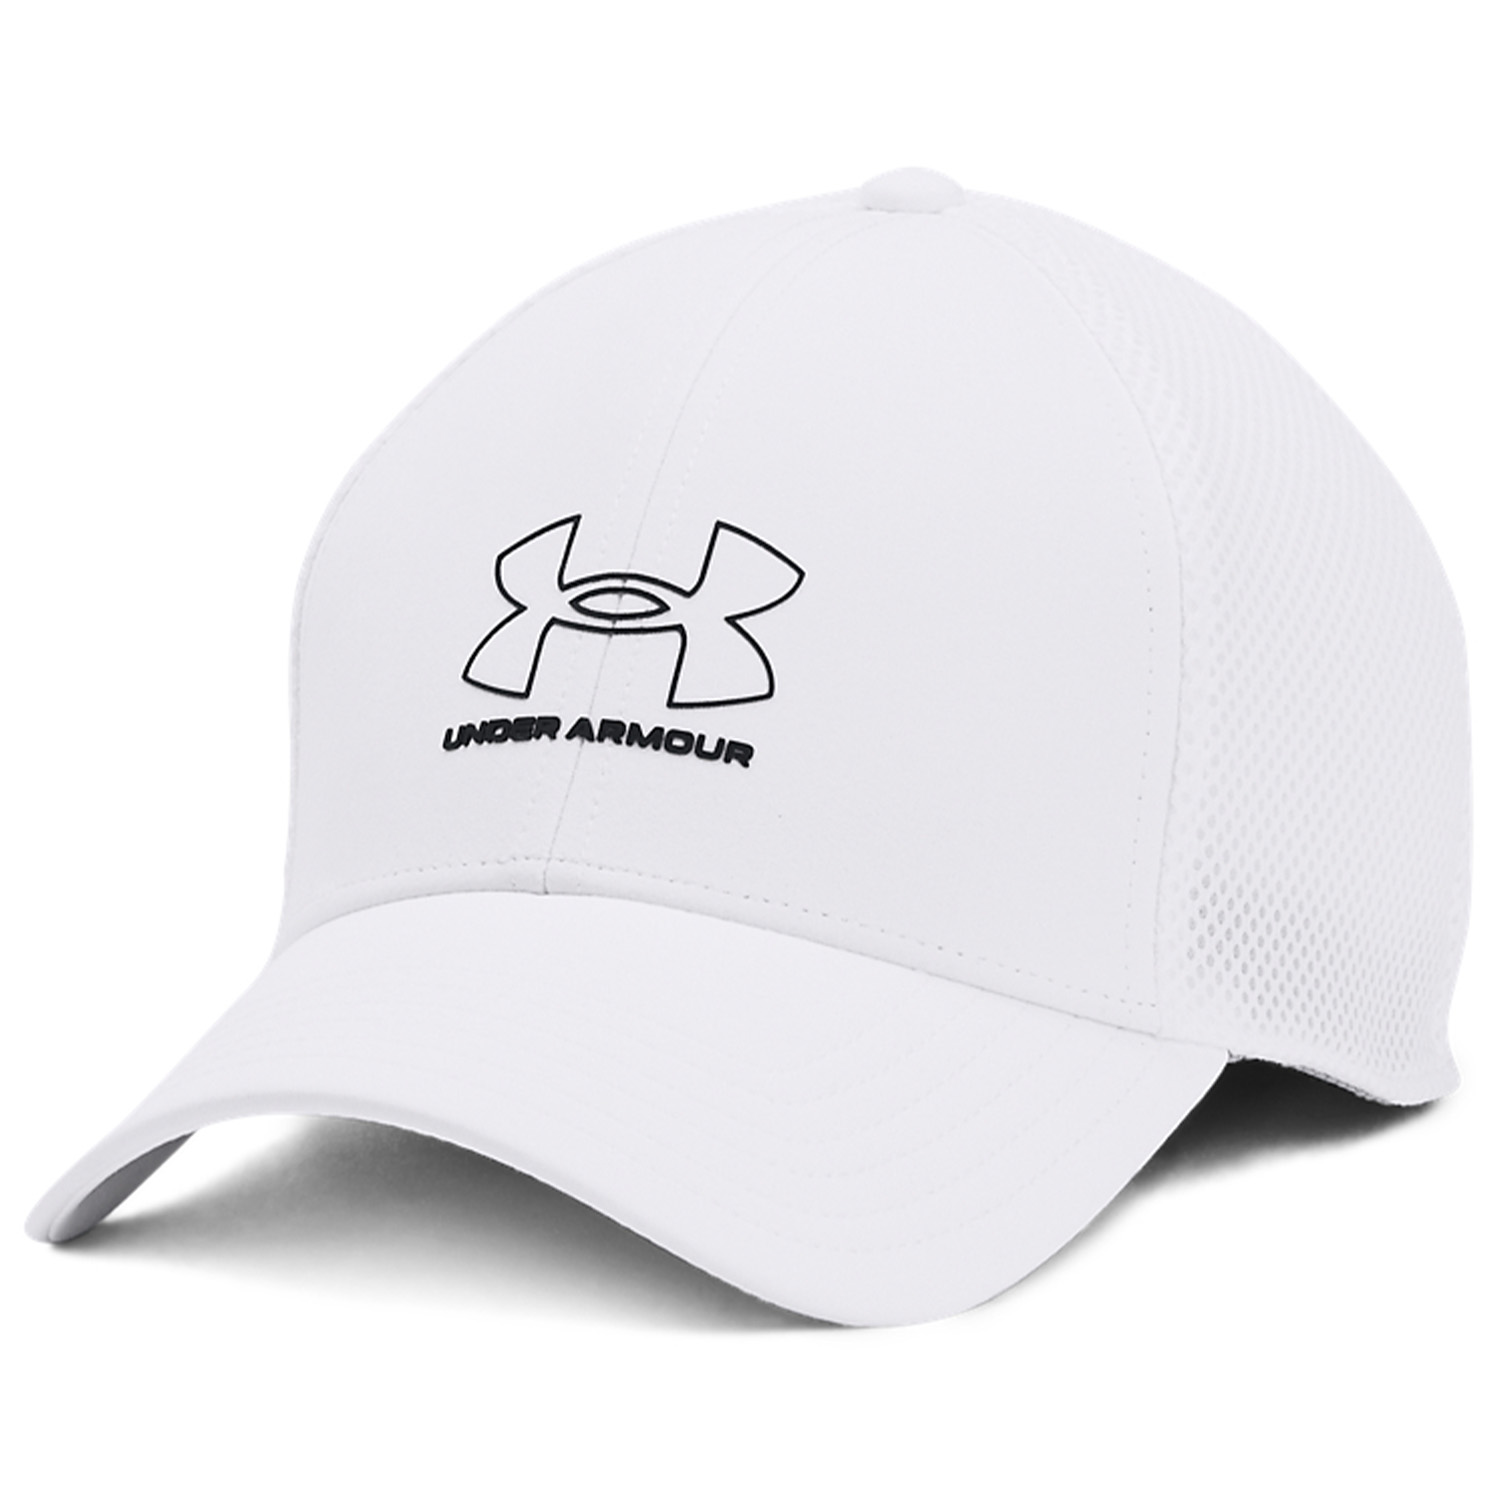 Under Armour Iso-Chill Driver Mesh Adjustable Cap